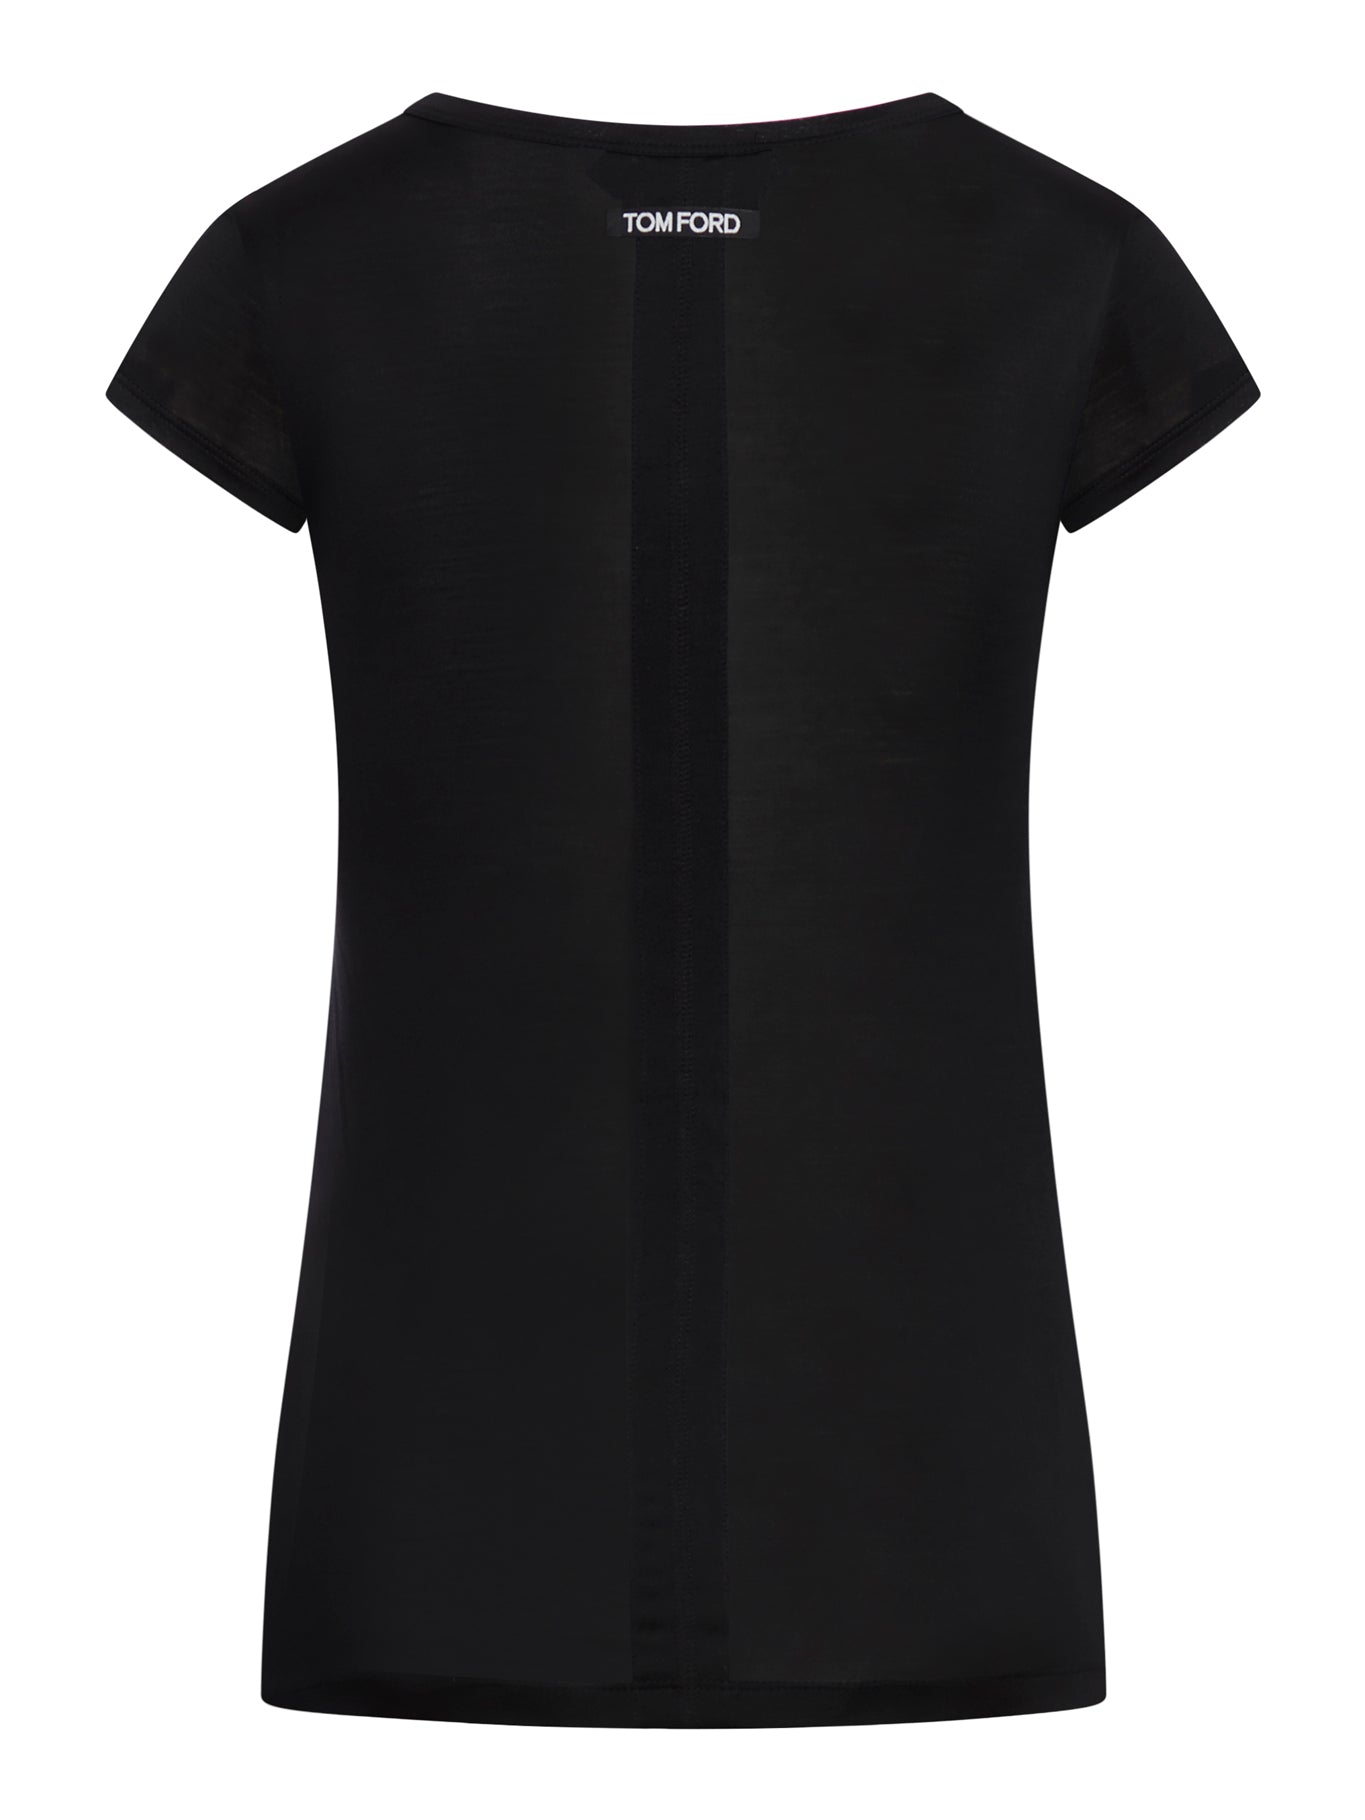 SILK JERSEY FITTED T-SHIRT WITH TOM FORD LOGO